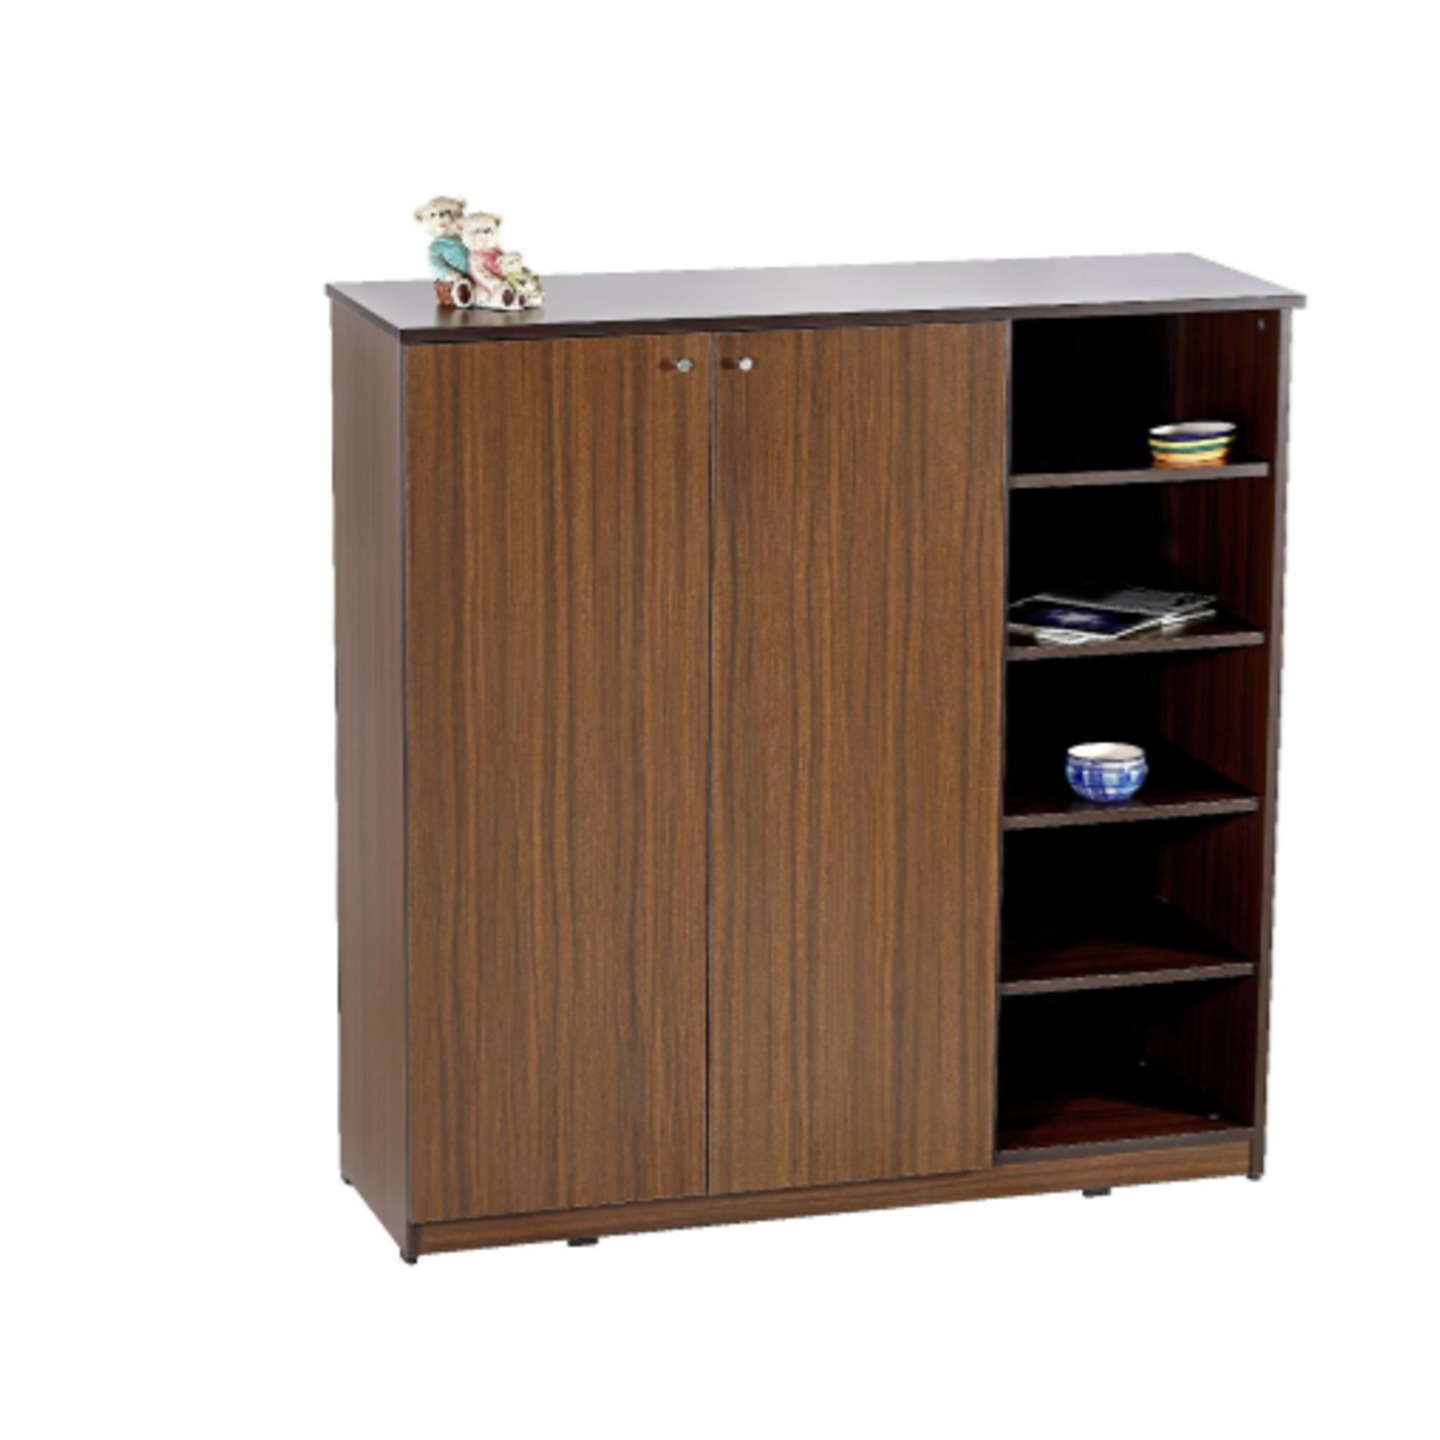 RD Multi Utility Cabinets RD-604 In Brown Colour